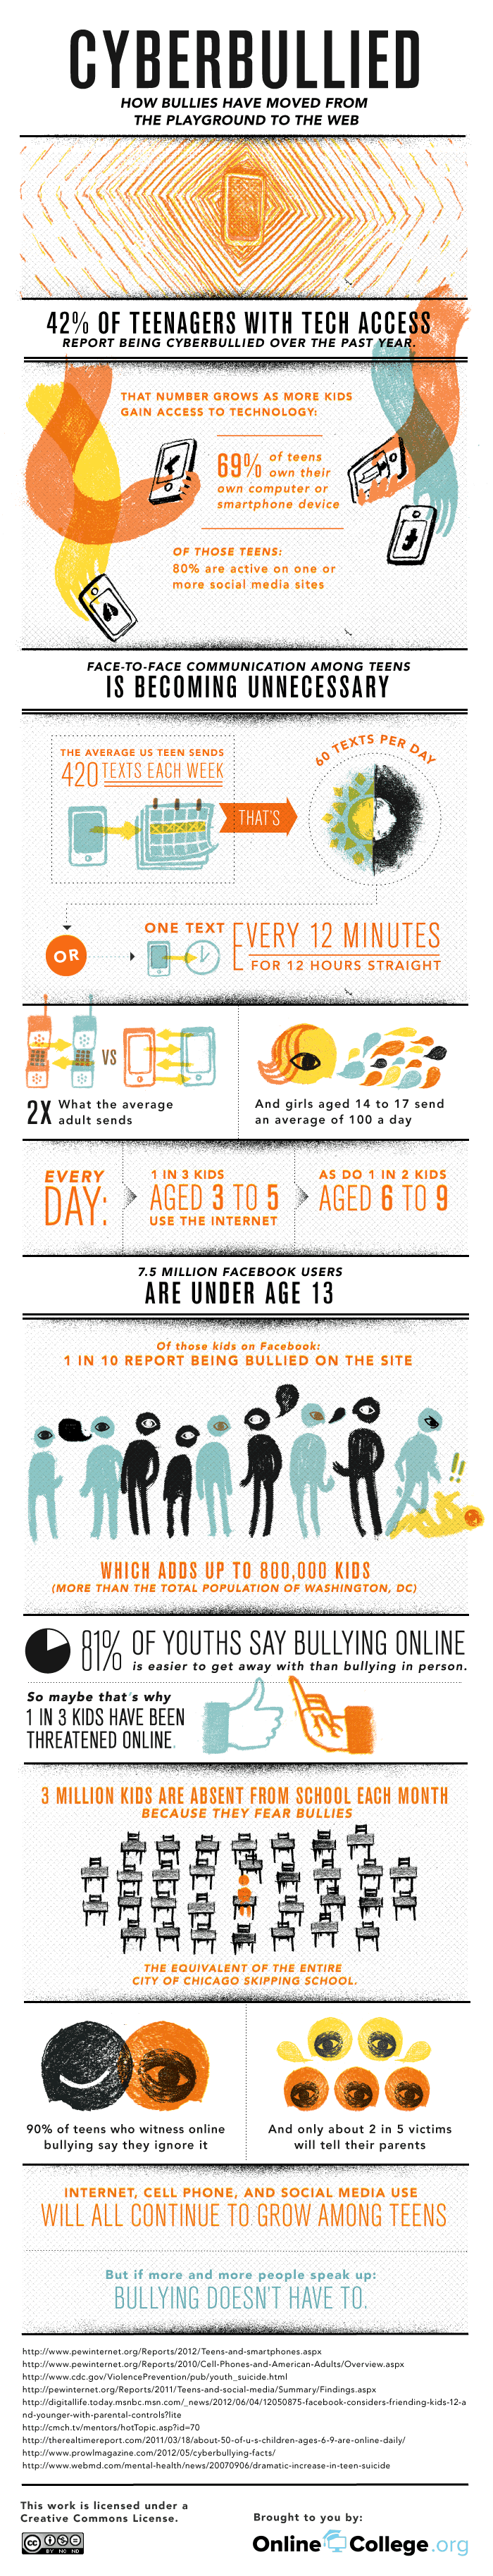 Cyberbullying Infographic with Stats About Teen Internet Usage